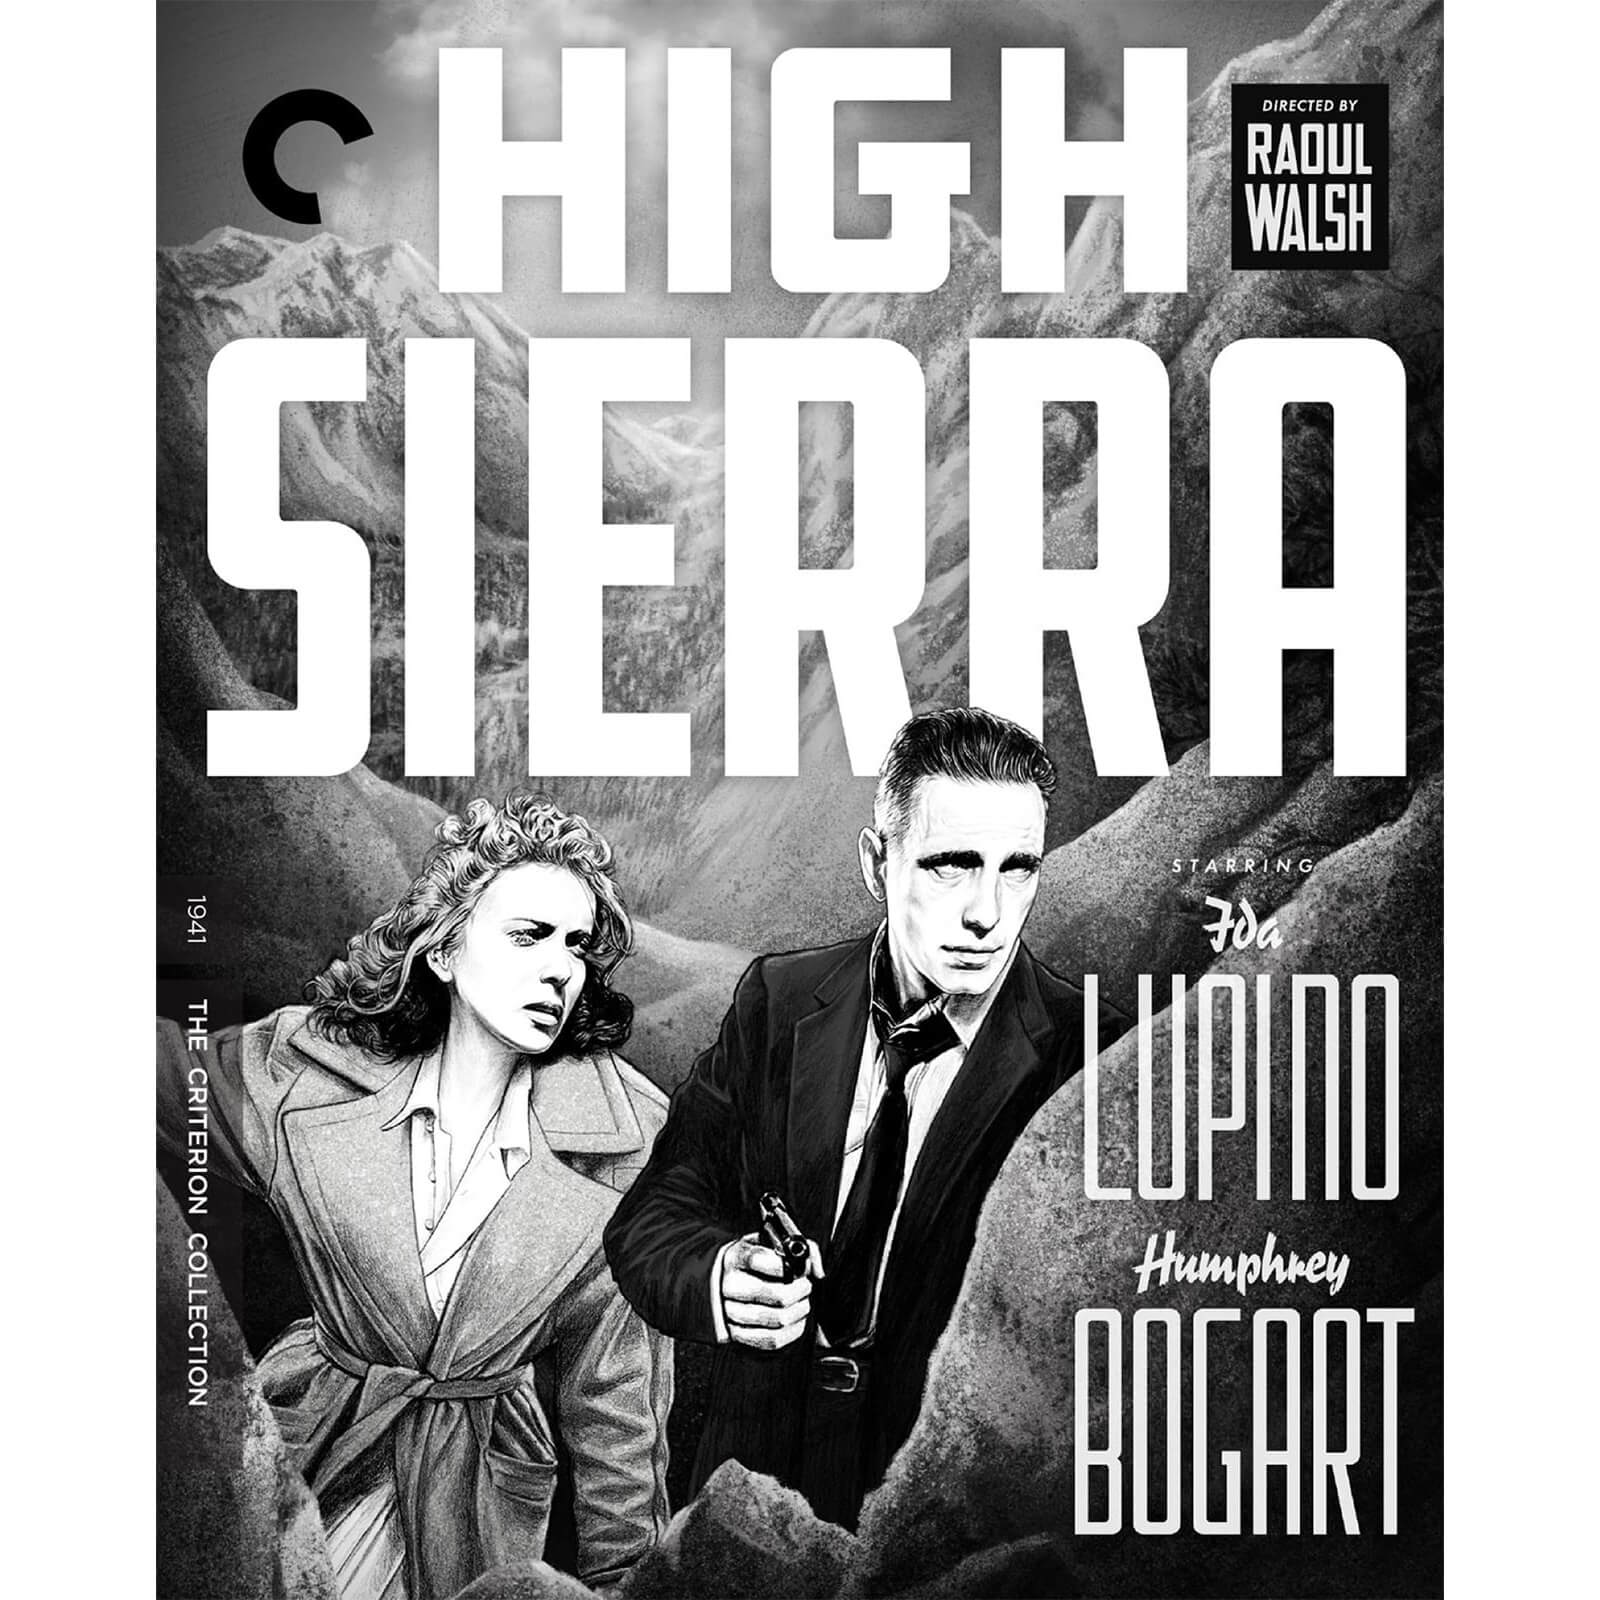 High Sierra - The Criterion Collection